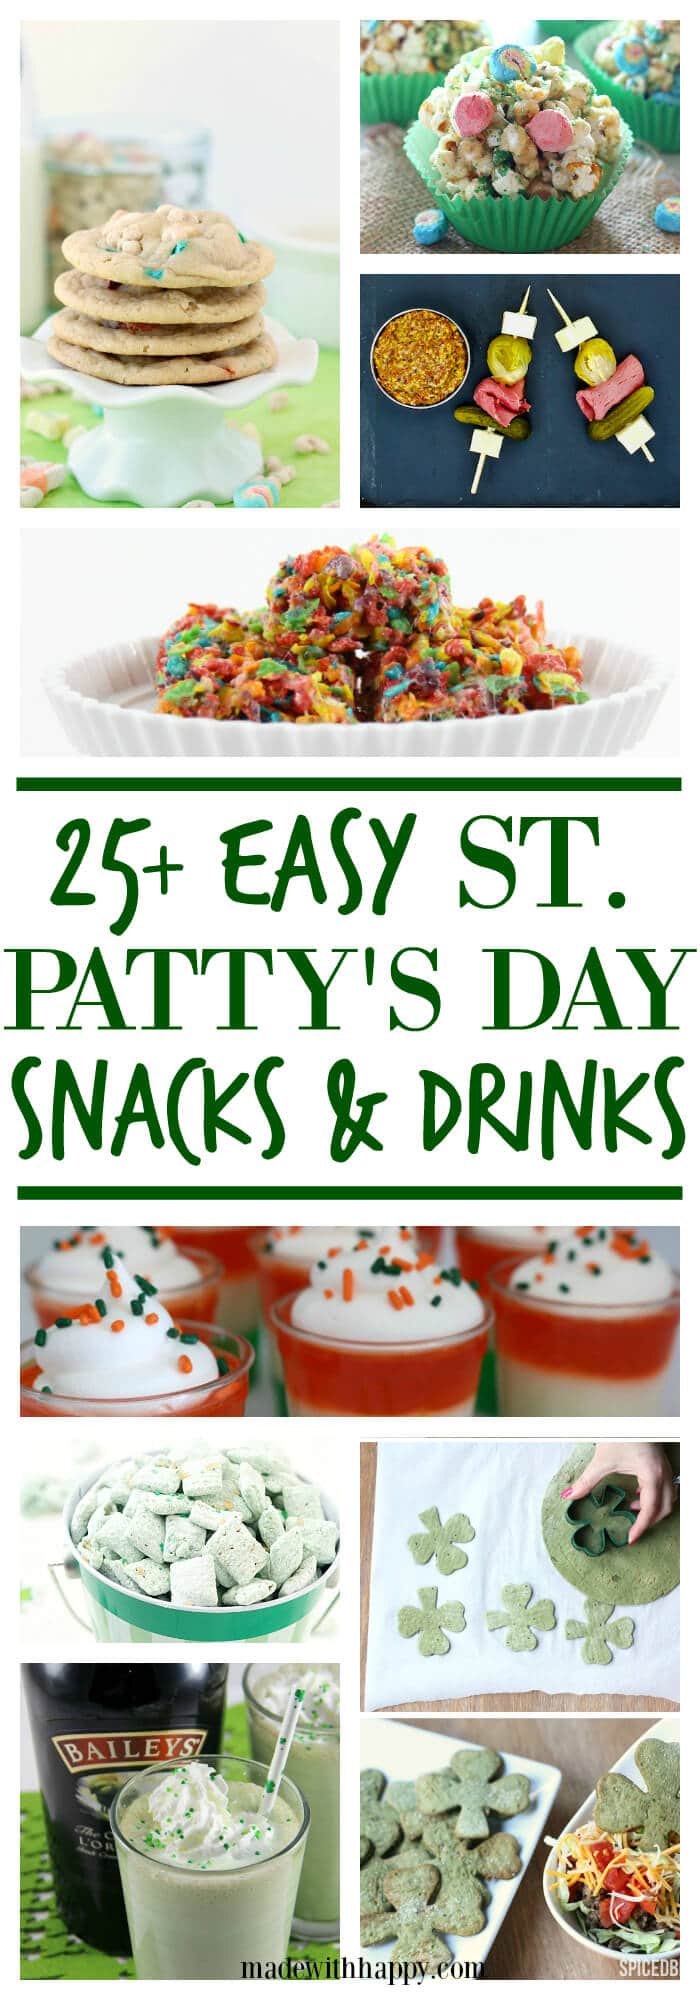 St. Patrick's day Snacks and Drinks